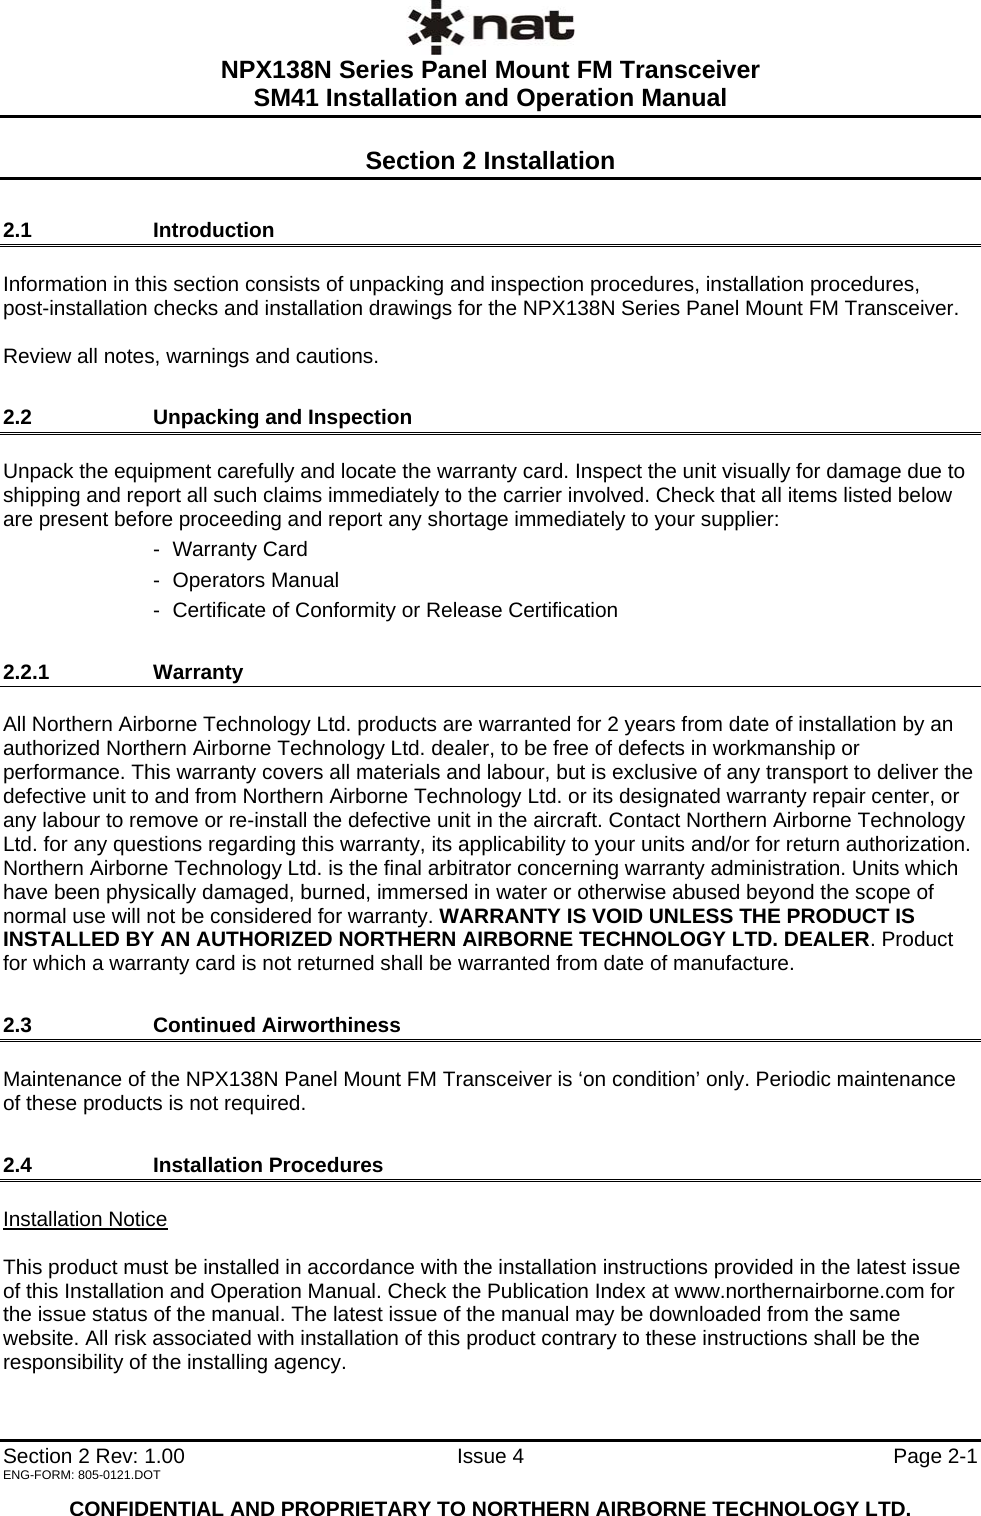  NPX138N Series Panel Mount FM Transceiver  SM41 Installation and Operation Manual   Section 2 Rev: 1.00  Issue 4   Page 2-1 ENG-FORM: 805-0121.DOT  CONFIDENTIAL AND PROPRIETARY TO NORTHERN AIRBORNE TECHNOLOGY LTD. Section 2 Installation 2.1   Introduction Information in this section consists of unpacking and inspection procedures, installation procedures,  post-installation checks and installation drawings for the NPX138N Series Panel Mount FM Transceiver.  Review all notes, warnings and cautions. 2.2   Unpacking and Inspection Unpack the equipment carefully and locate the warranty card. Inspect the unit visually for damage due to shipping and report all such claims immediately to the carrier involved. Check that all items listed below are present before proceeding and report any shortage immediately to your supplier: - Warranty Card - Operators Manual -  Certificate of Conformity or Release Certification 2.2.1   Warranty All Northern Airborne Technology Ltd. products are warranted for 2 years from date of installation by an authorized Northern Airborne Technology Ltd. dealer, to be free of defects in workmanship or performance. This warranty covers all materials and labour, but is exclusive of any transport to deliver the defective unit to and from Northern Airborne Technology Ltd. or its designated warranty repair center, or any labour to remove or re-install the defective unit in the aircraft. Contact Northern Airborne Technology Ltd. for any questions regarding this warranty, its applicability to your units and/or for return authorization. Northern Airborne Technology Ltd. is the final arbitrator concerning warranty administration. Units which have been physically damaged, burned, immersed in water or otherwise abused beyond the scope of normal use will not be considered for warranty. WARRANTY IS VOID UNLESS THE PRODUCT IS INSTALLED BY AN AUTHORIZED NORTHERN AIRBORNE TECHNOLOGY LTD. DEALER. Product for which a warranty card is not returned shall be warranted from date of manufacture. 2.3   Continued Airworthiness Maintenance of the NPX138N Panel Mount FM Transceiver is ‘on condition’ only. Periodic maintenance of these products is not required. 2.4   Installation Procedures Installation Notice  This product must be installed in accordance with the installation instructions provided in the latest issue of this Installation and Operation Manual. Check the Publication Index at www.northernairborne.com for the issue status of the manual. The latest issue of the manual may be downloaded from the same website. All risk associated with installation of this product contrary to these instructions shall be the responsibility of the installing agency. 